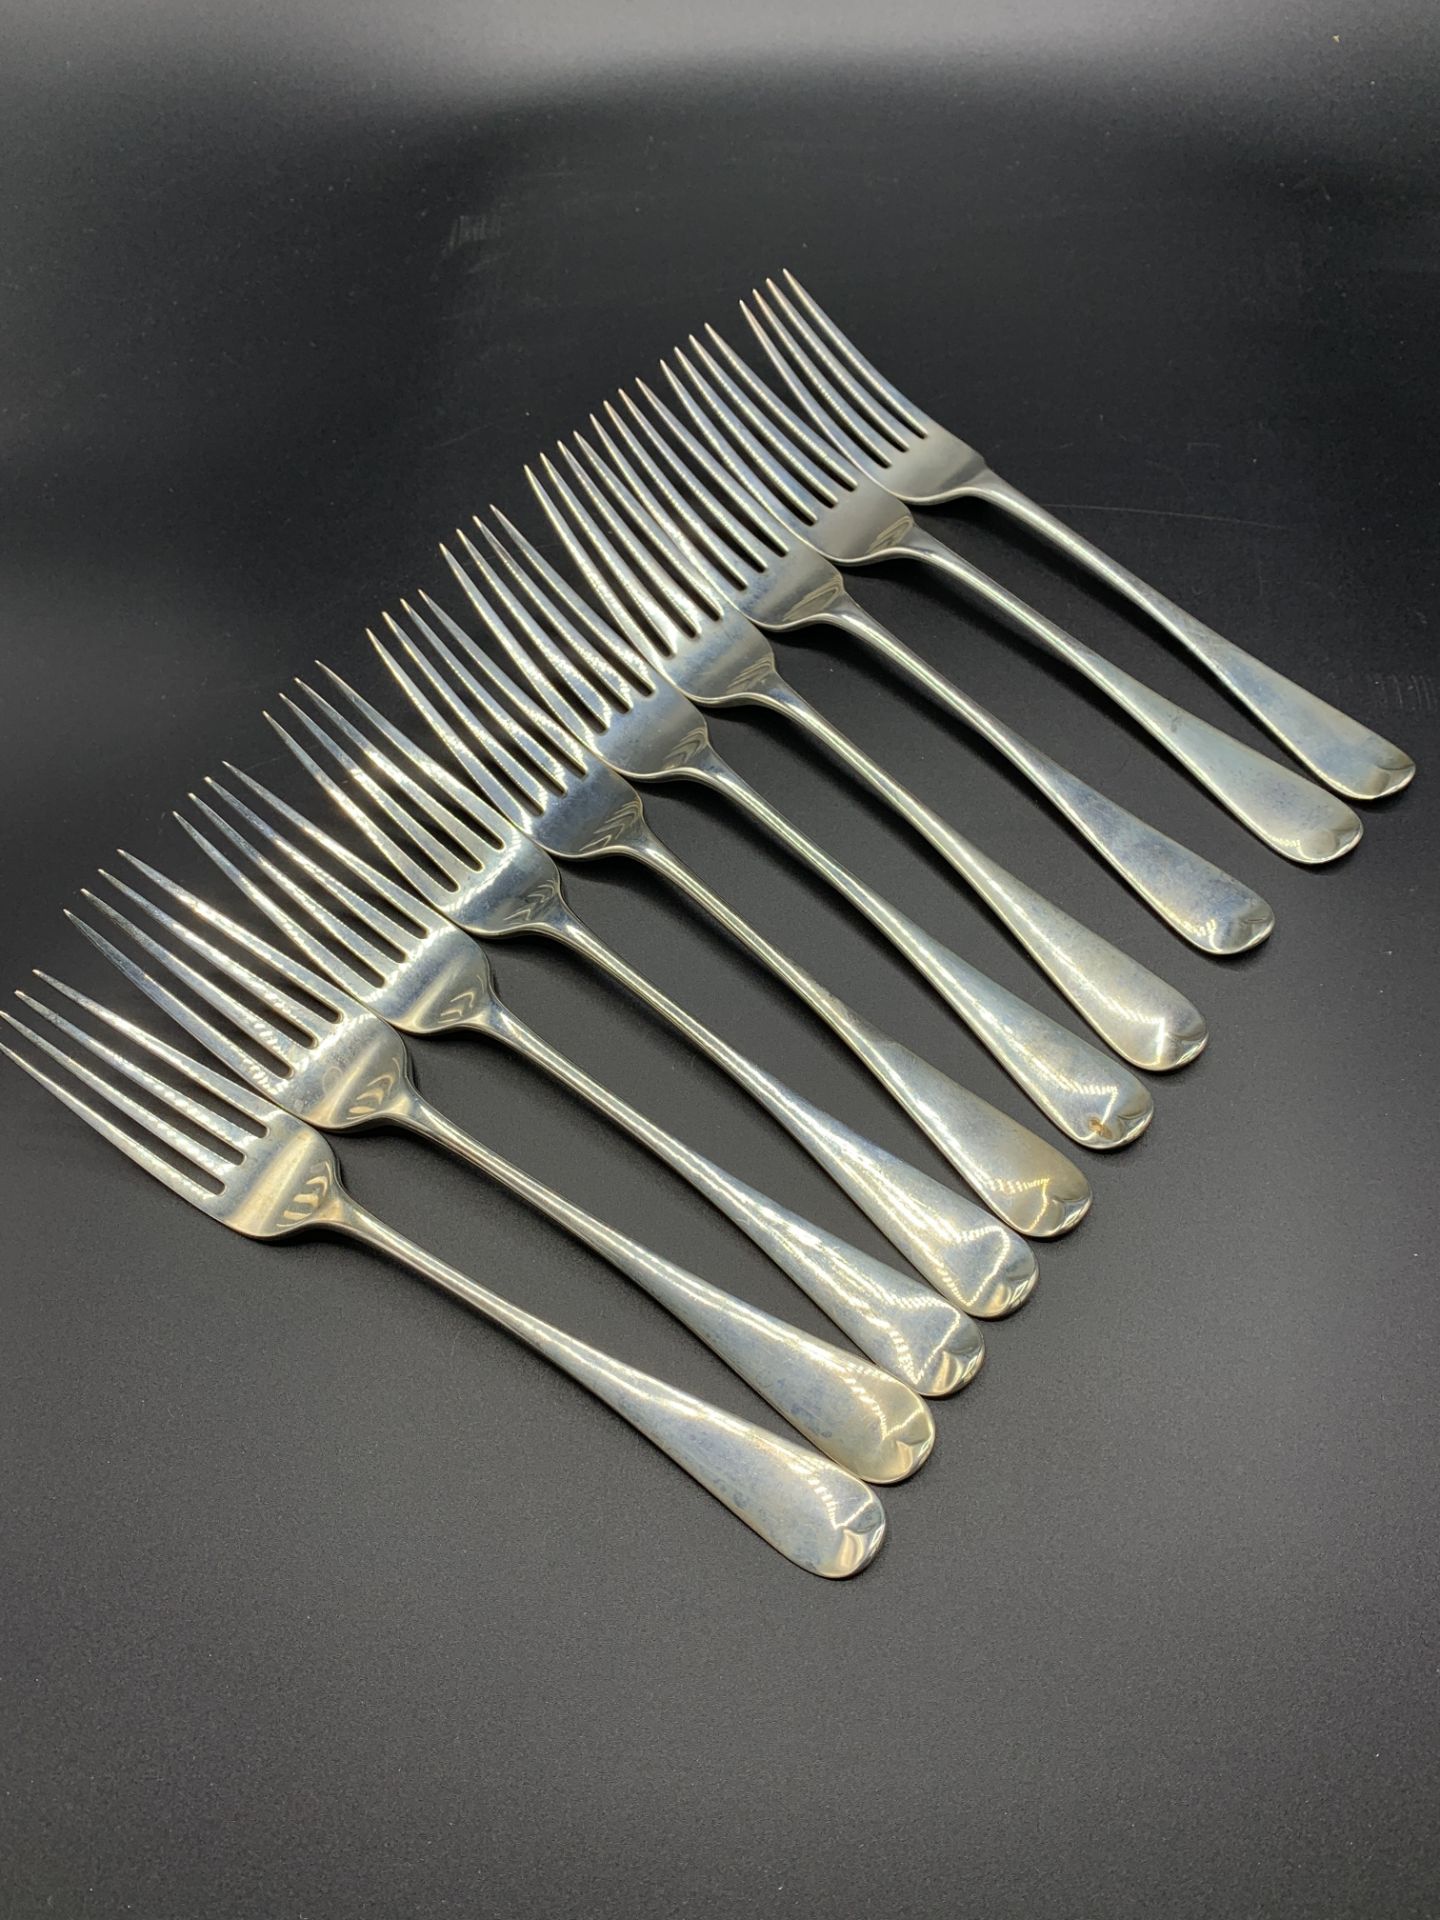 Ten late Georgian silver forks, London 1829 by William Cripps - Image 3 of 3